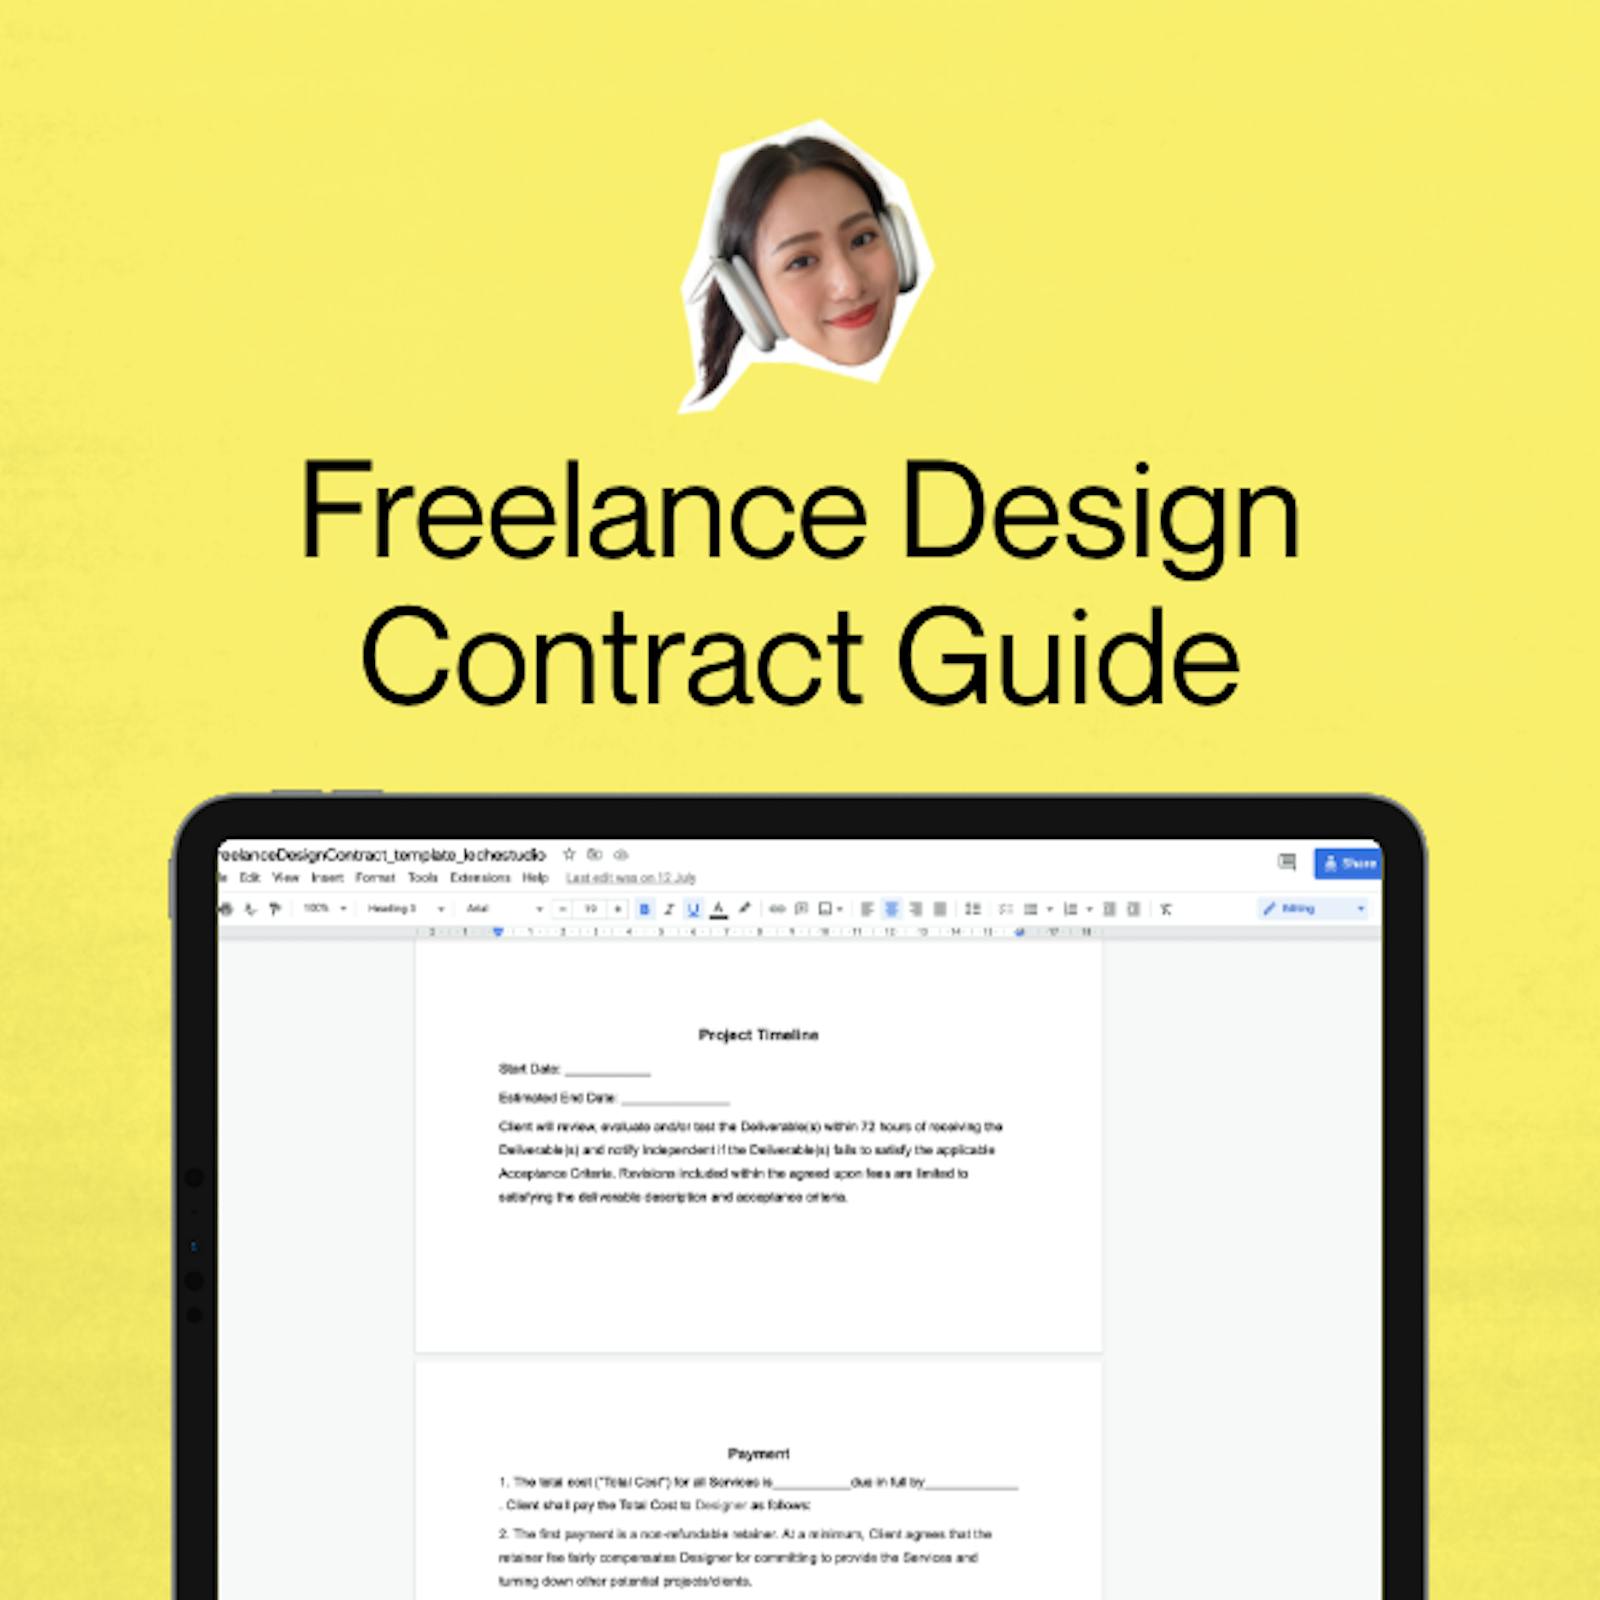 Freelance Design Contract Guide